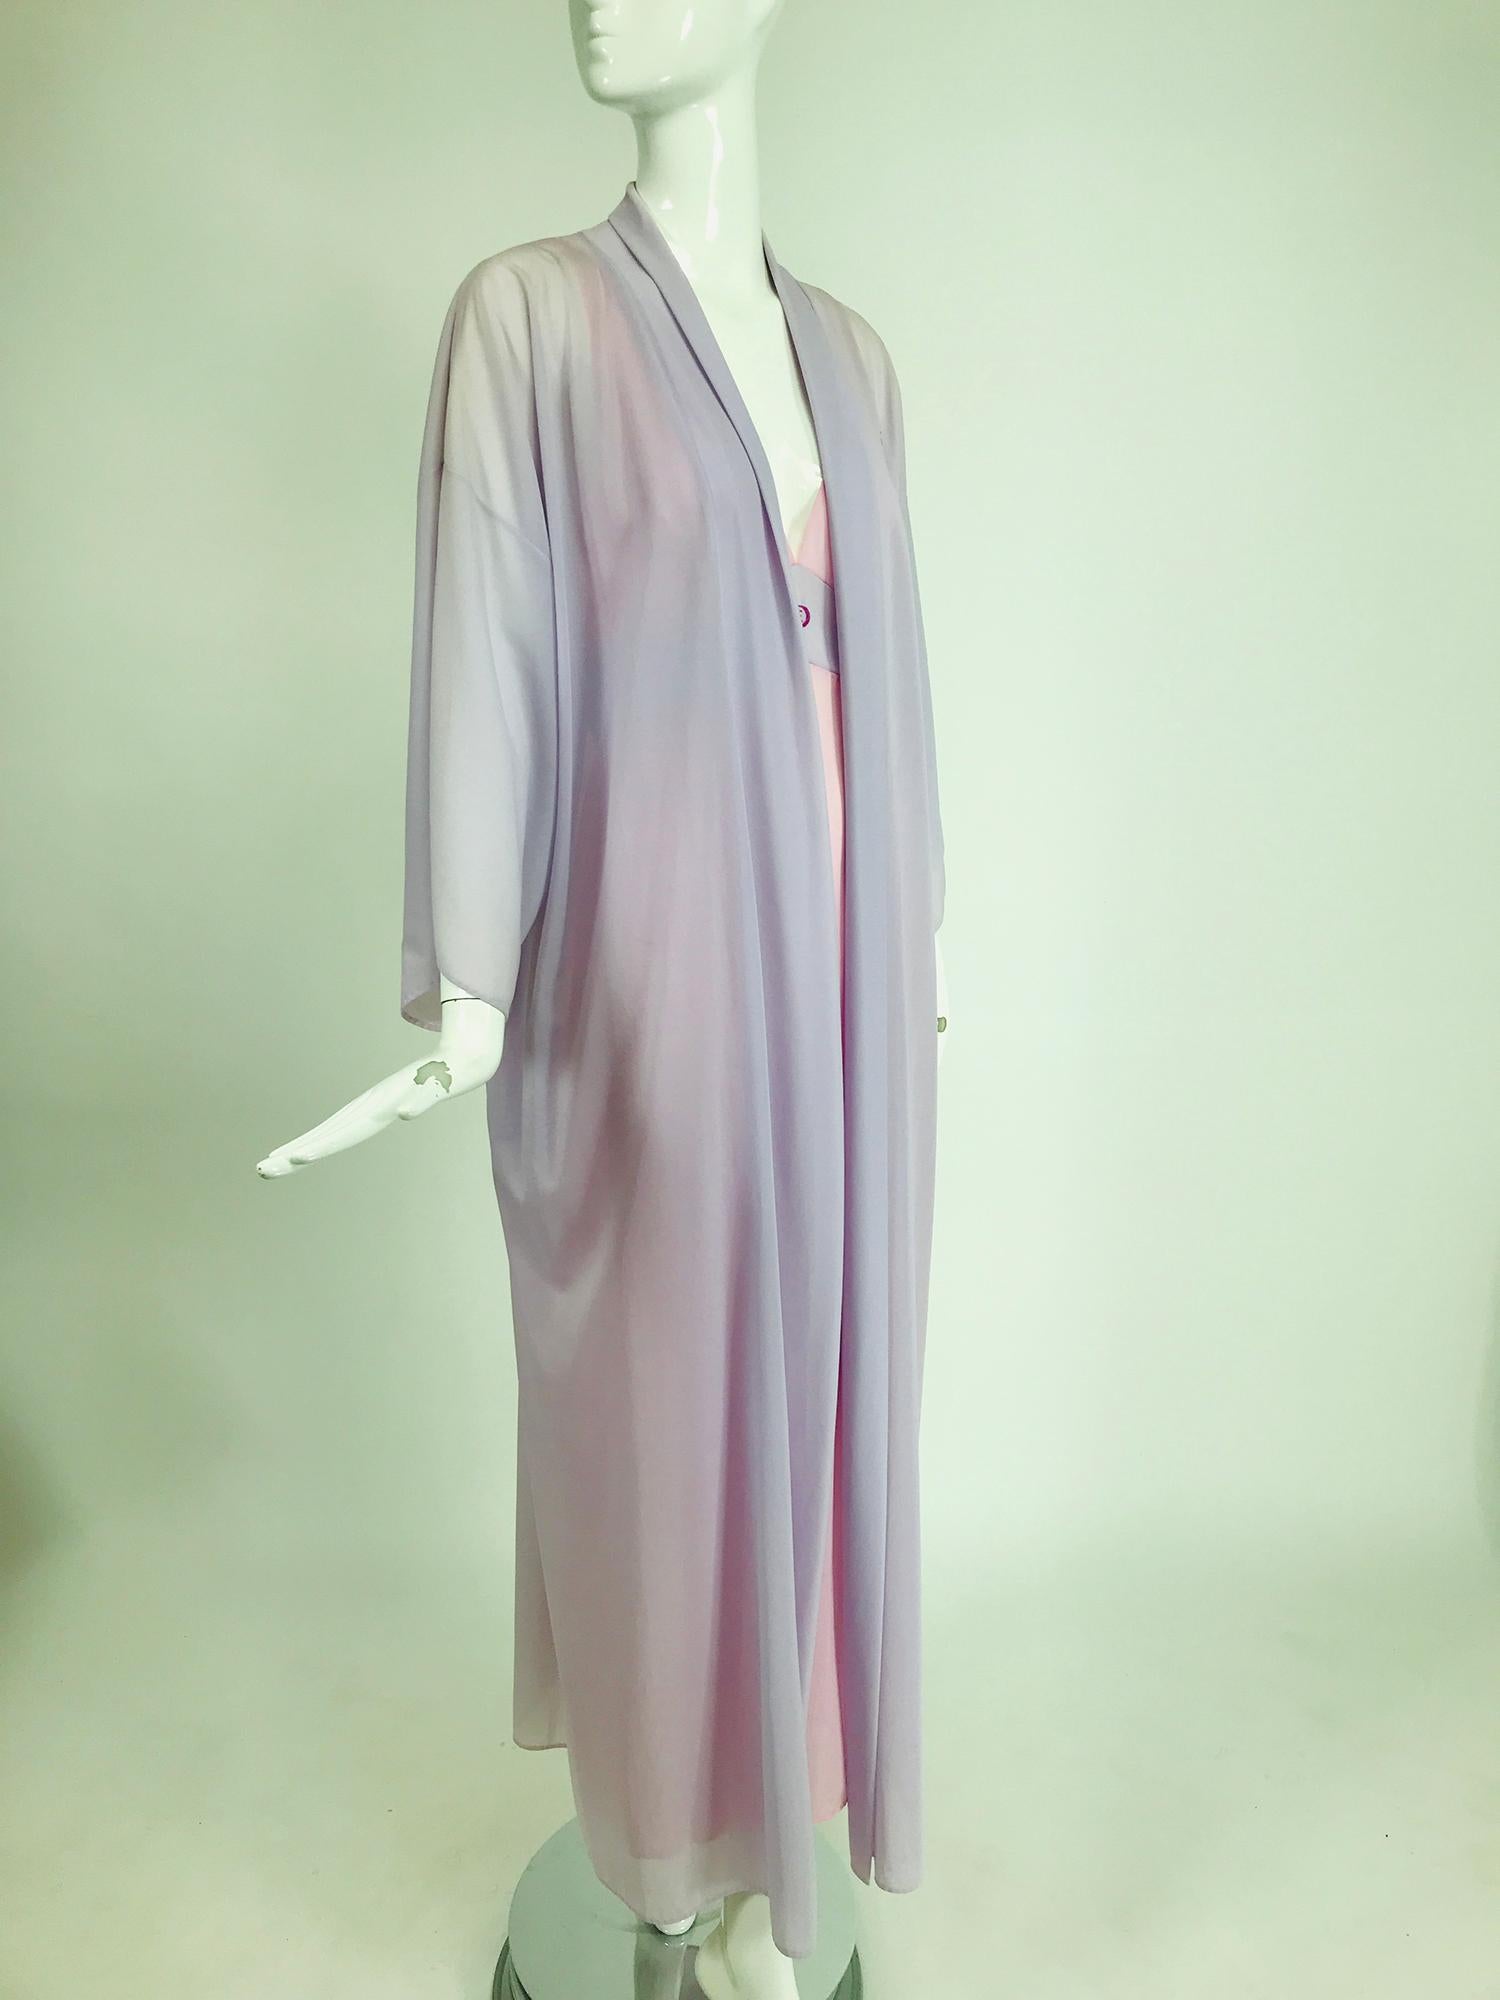 Emilio Pucci for Formfit Rogers 2pc. peignoir in sheer pink & lavender nylon. Long kimono sleeve wrap front gown, the belt is missing, in coral. The matching night gown is pull on with a V neckline front and back, high waist band and slightly full